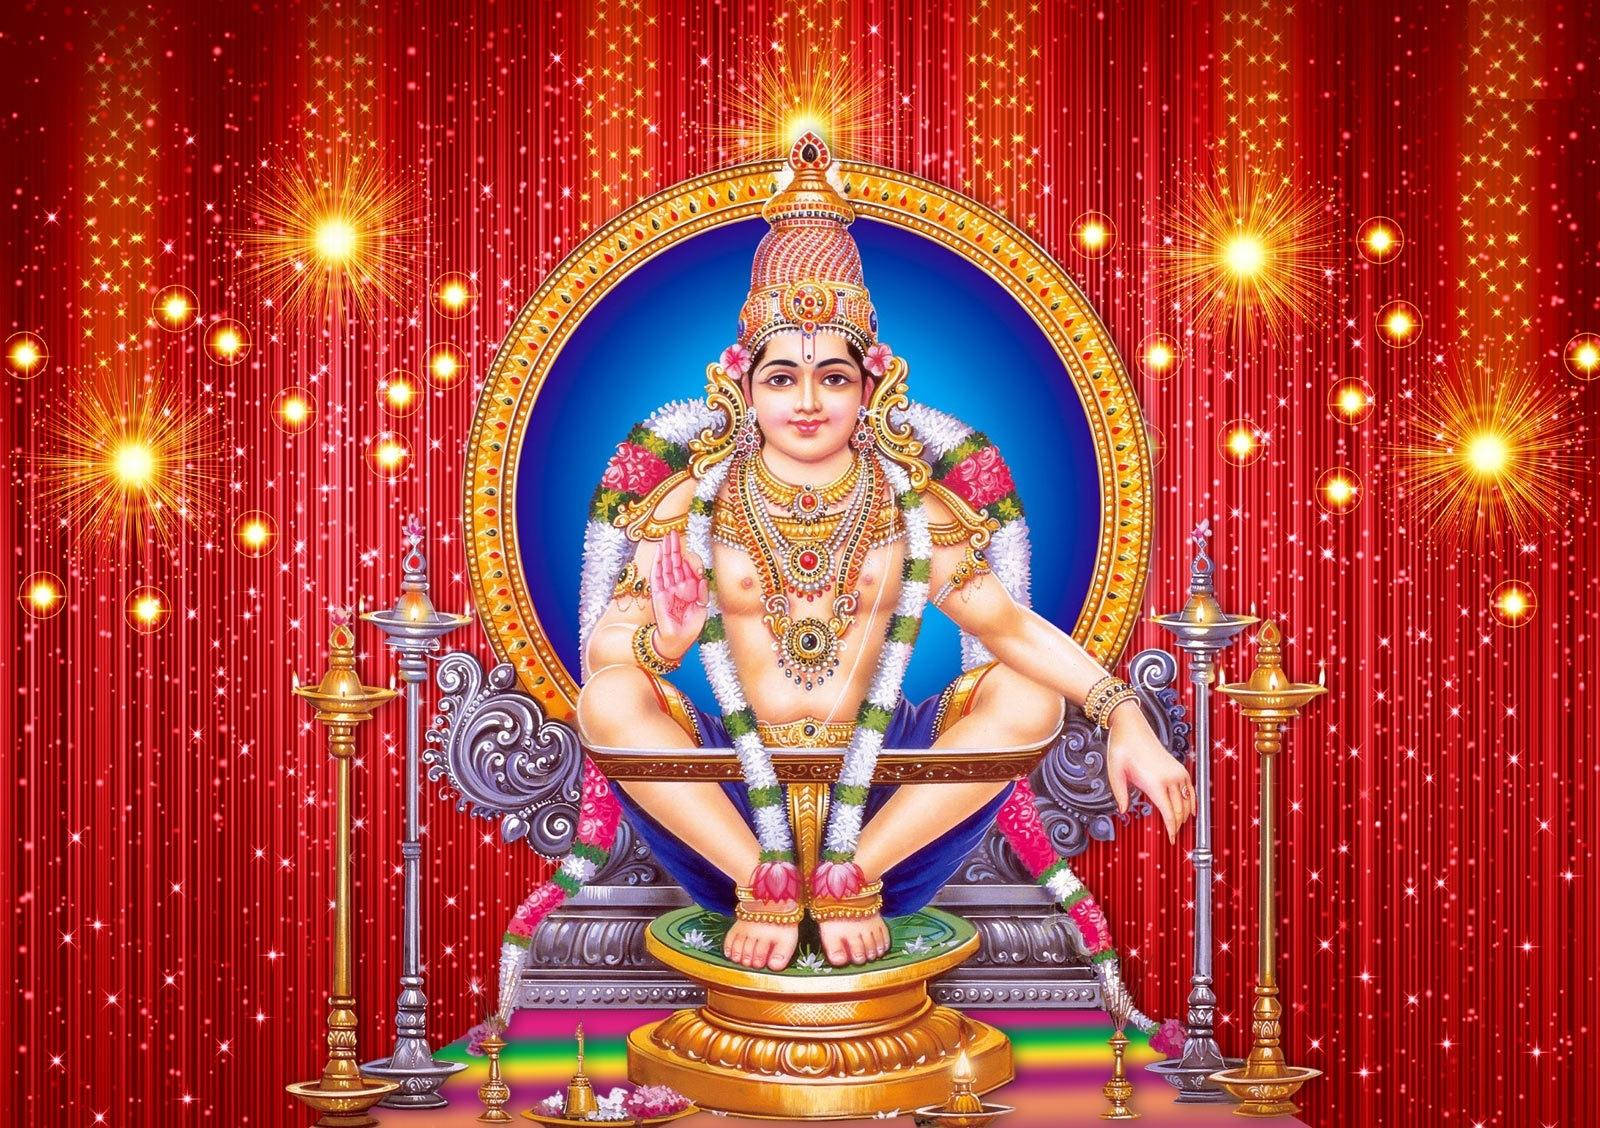 Glowing Visage Of Lord Ayyappa With Vivid Fireworks